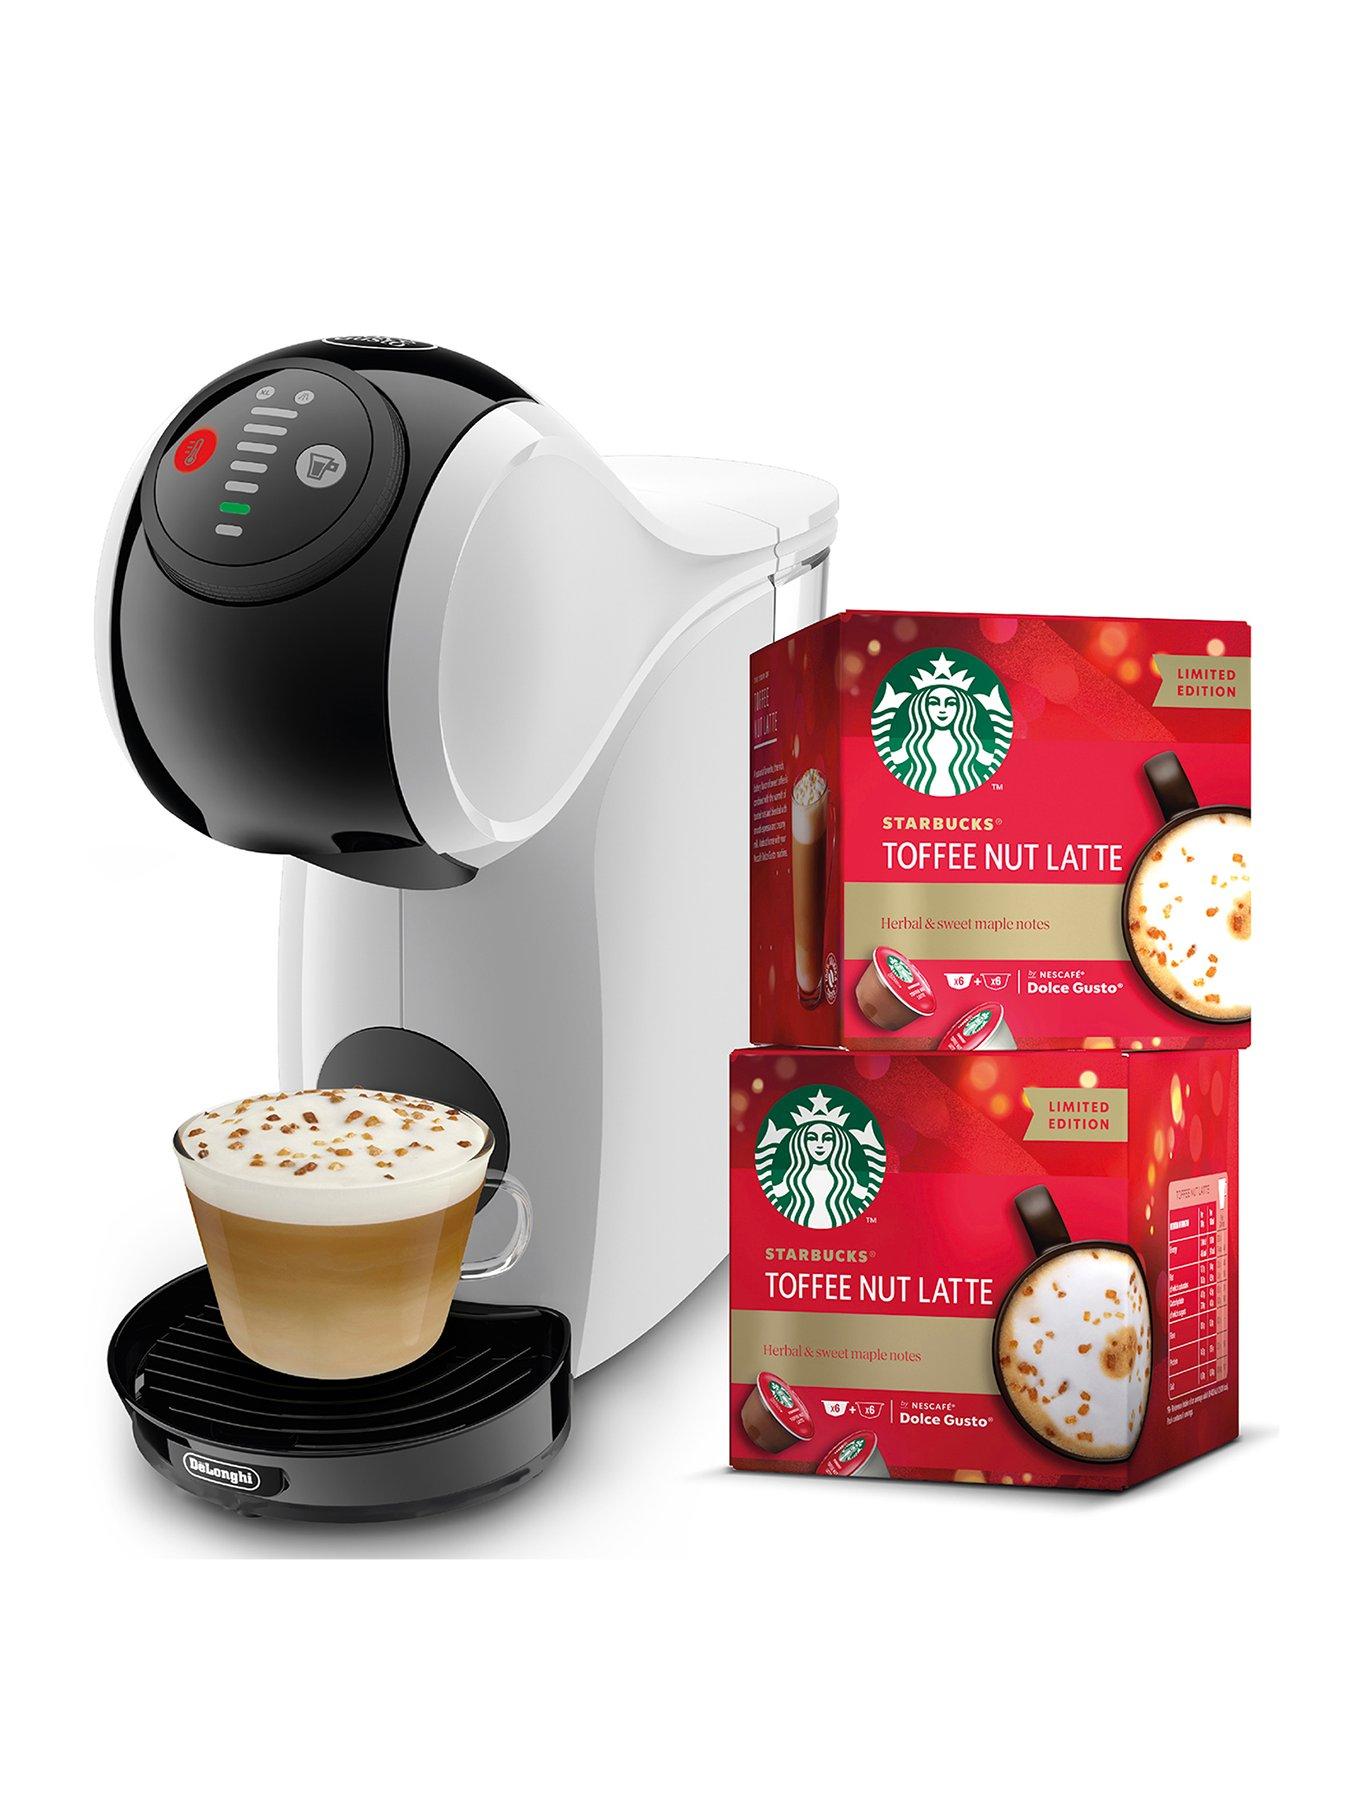 Dolce Gusto Starbucks, 8 Flavours to Choose From, Pack of 12, 24, 36 & 72  Pods